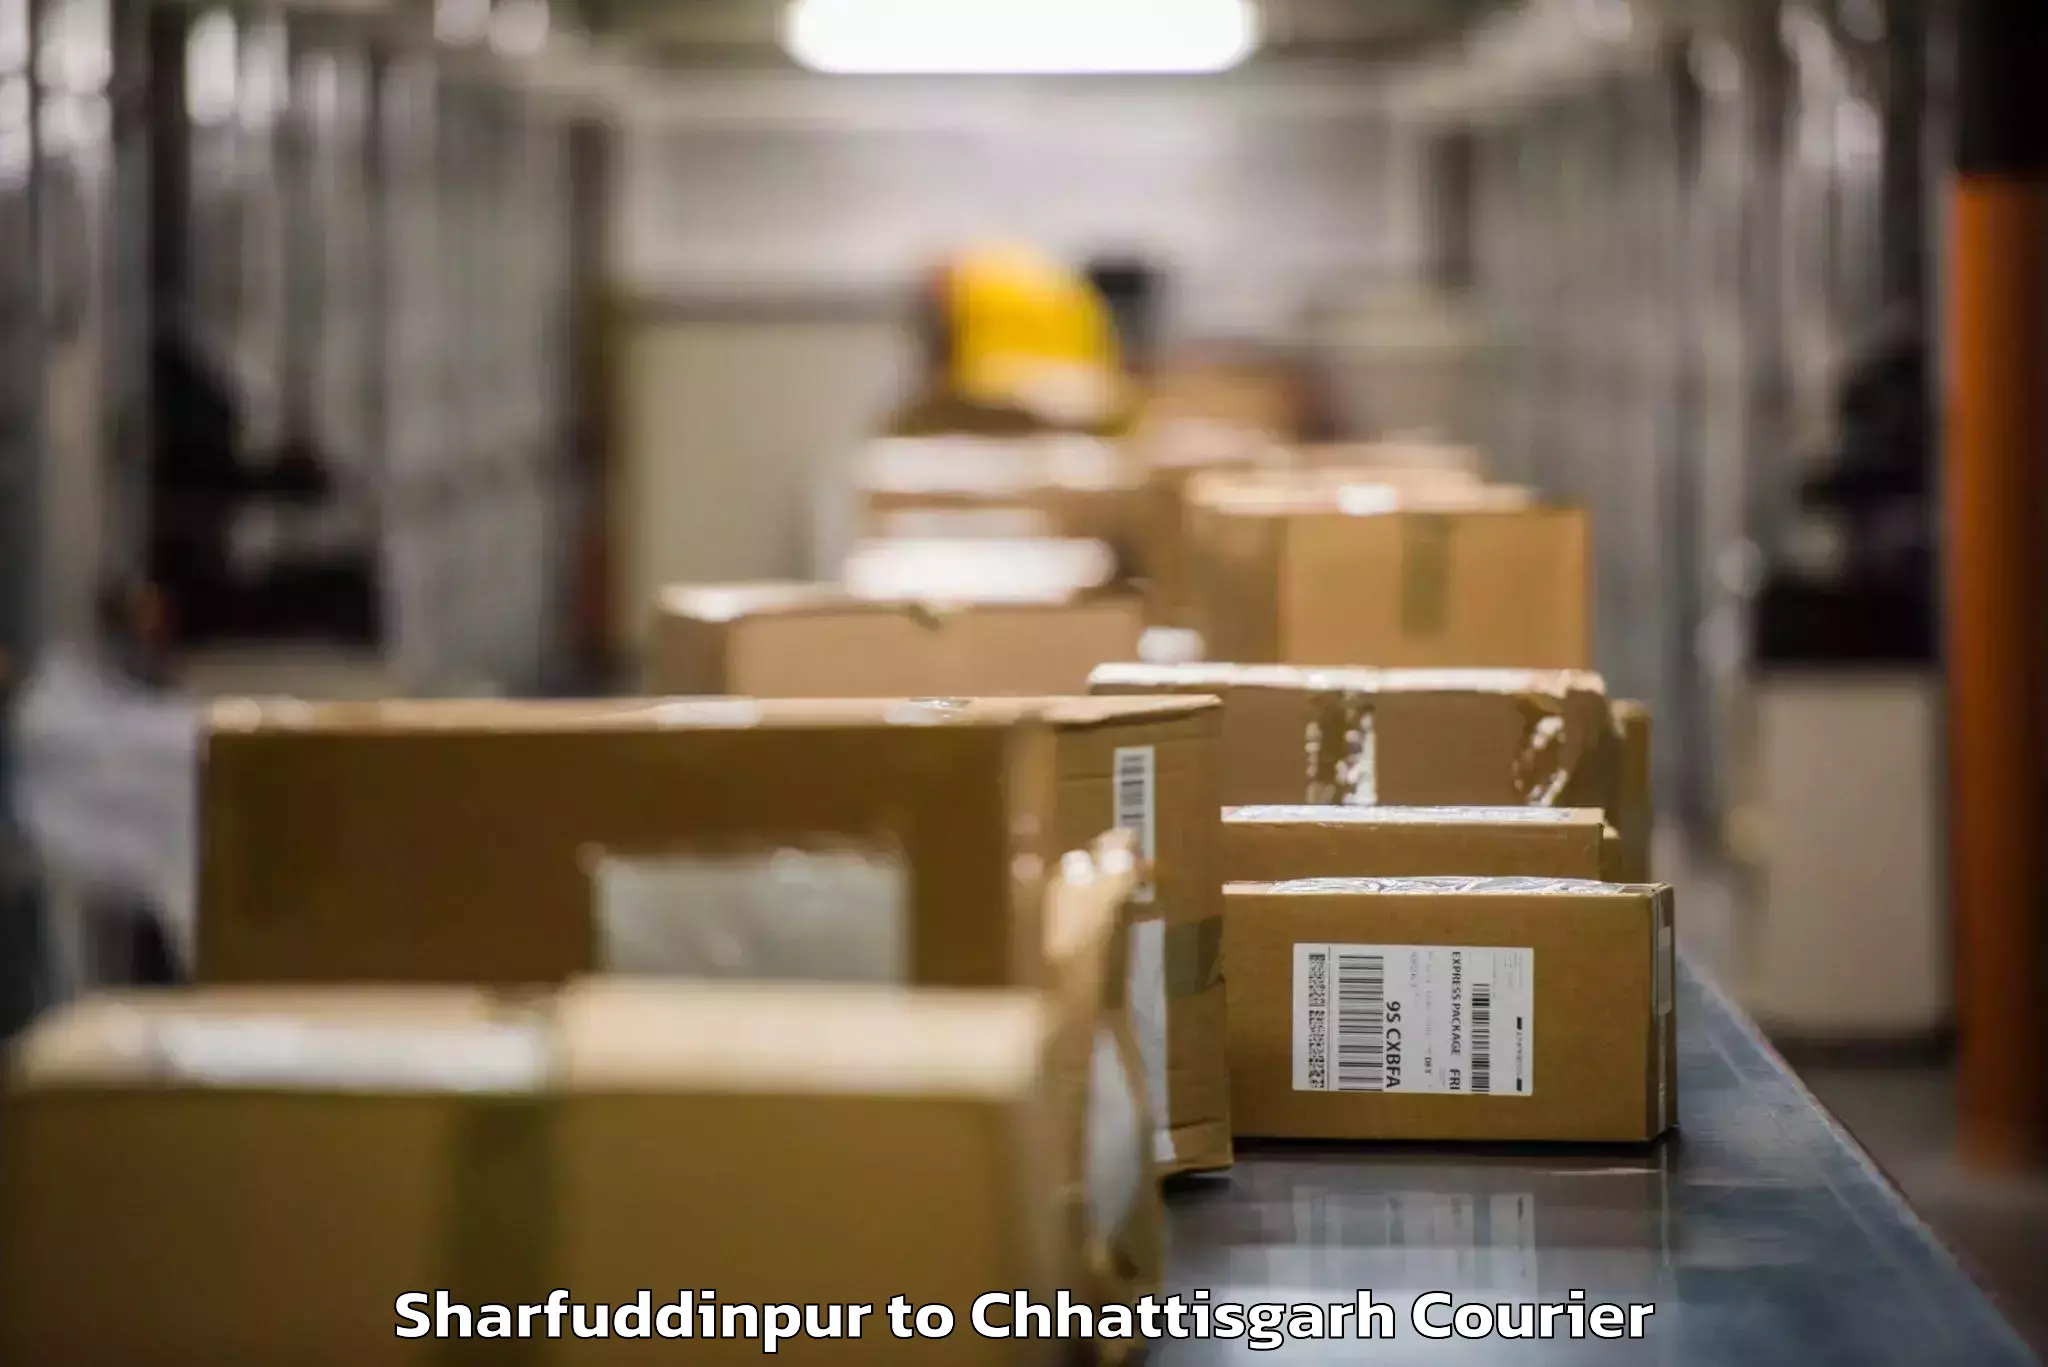 Luggage shipment processing in Sharfuddinpur to Ratanpur